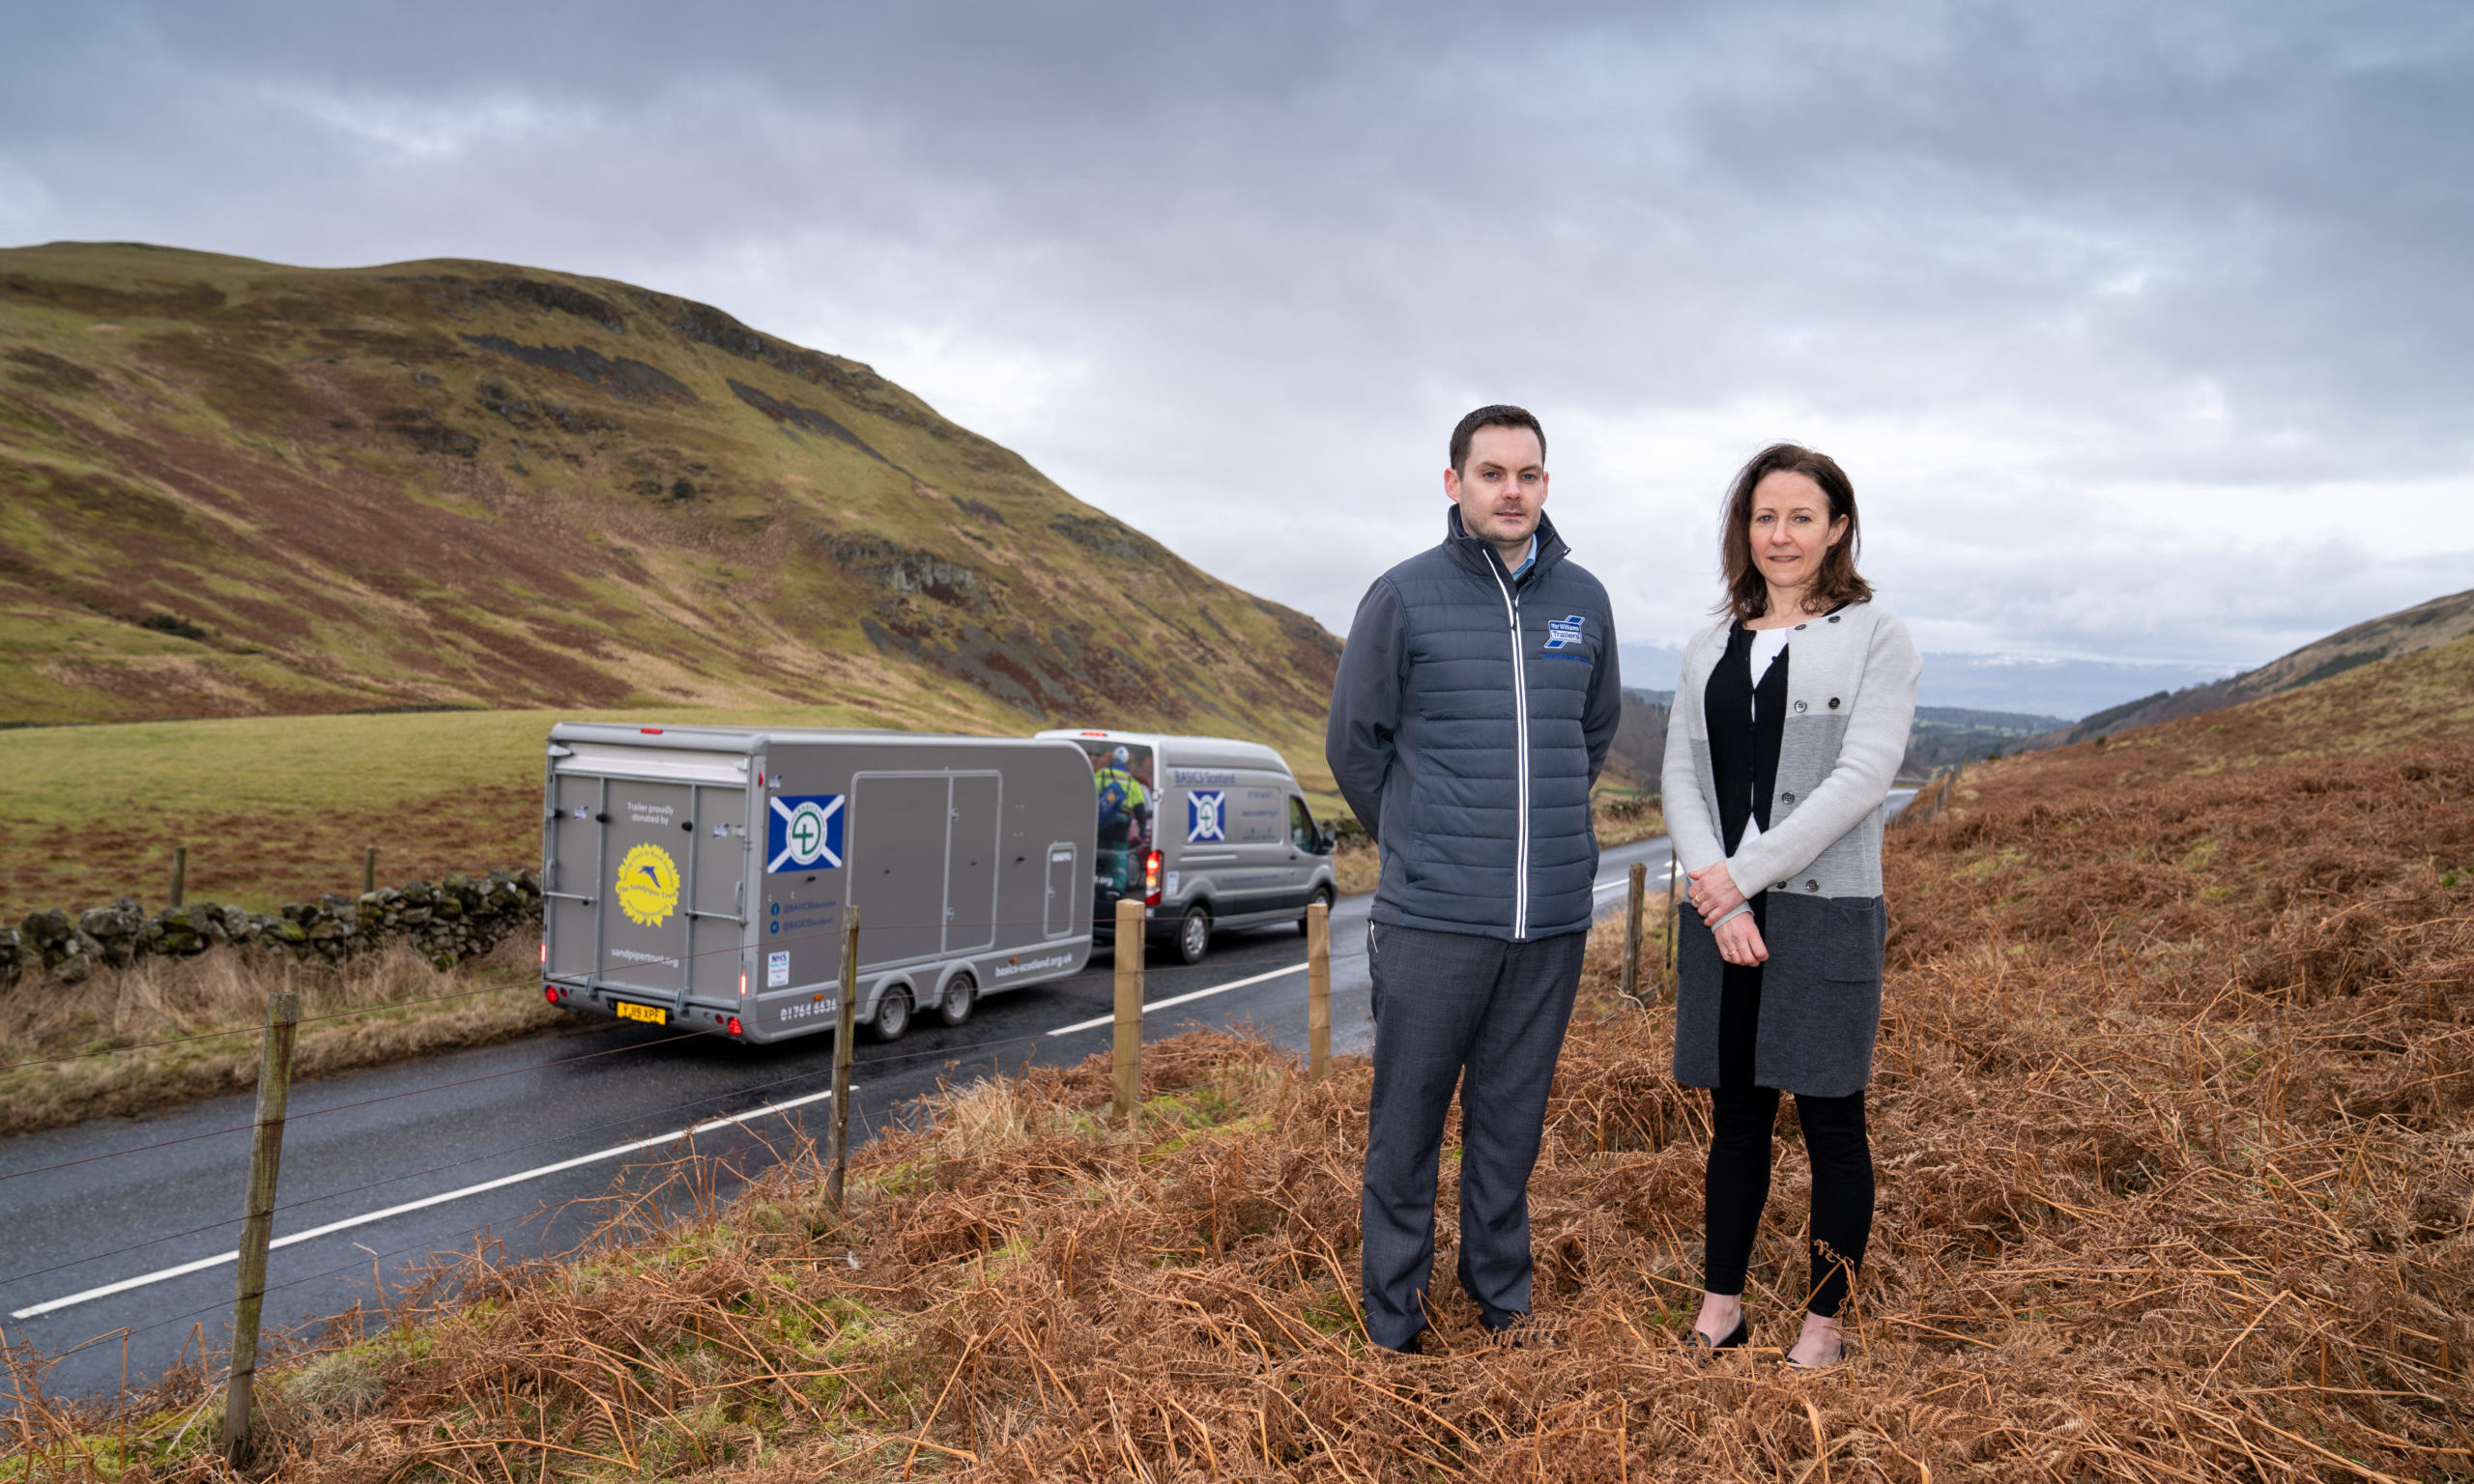 Lorna Duff from the Sandpiper Trust and Sean Cooper from the Stirling Trailer Centre.